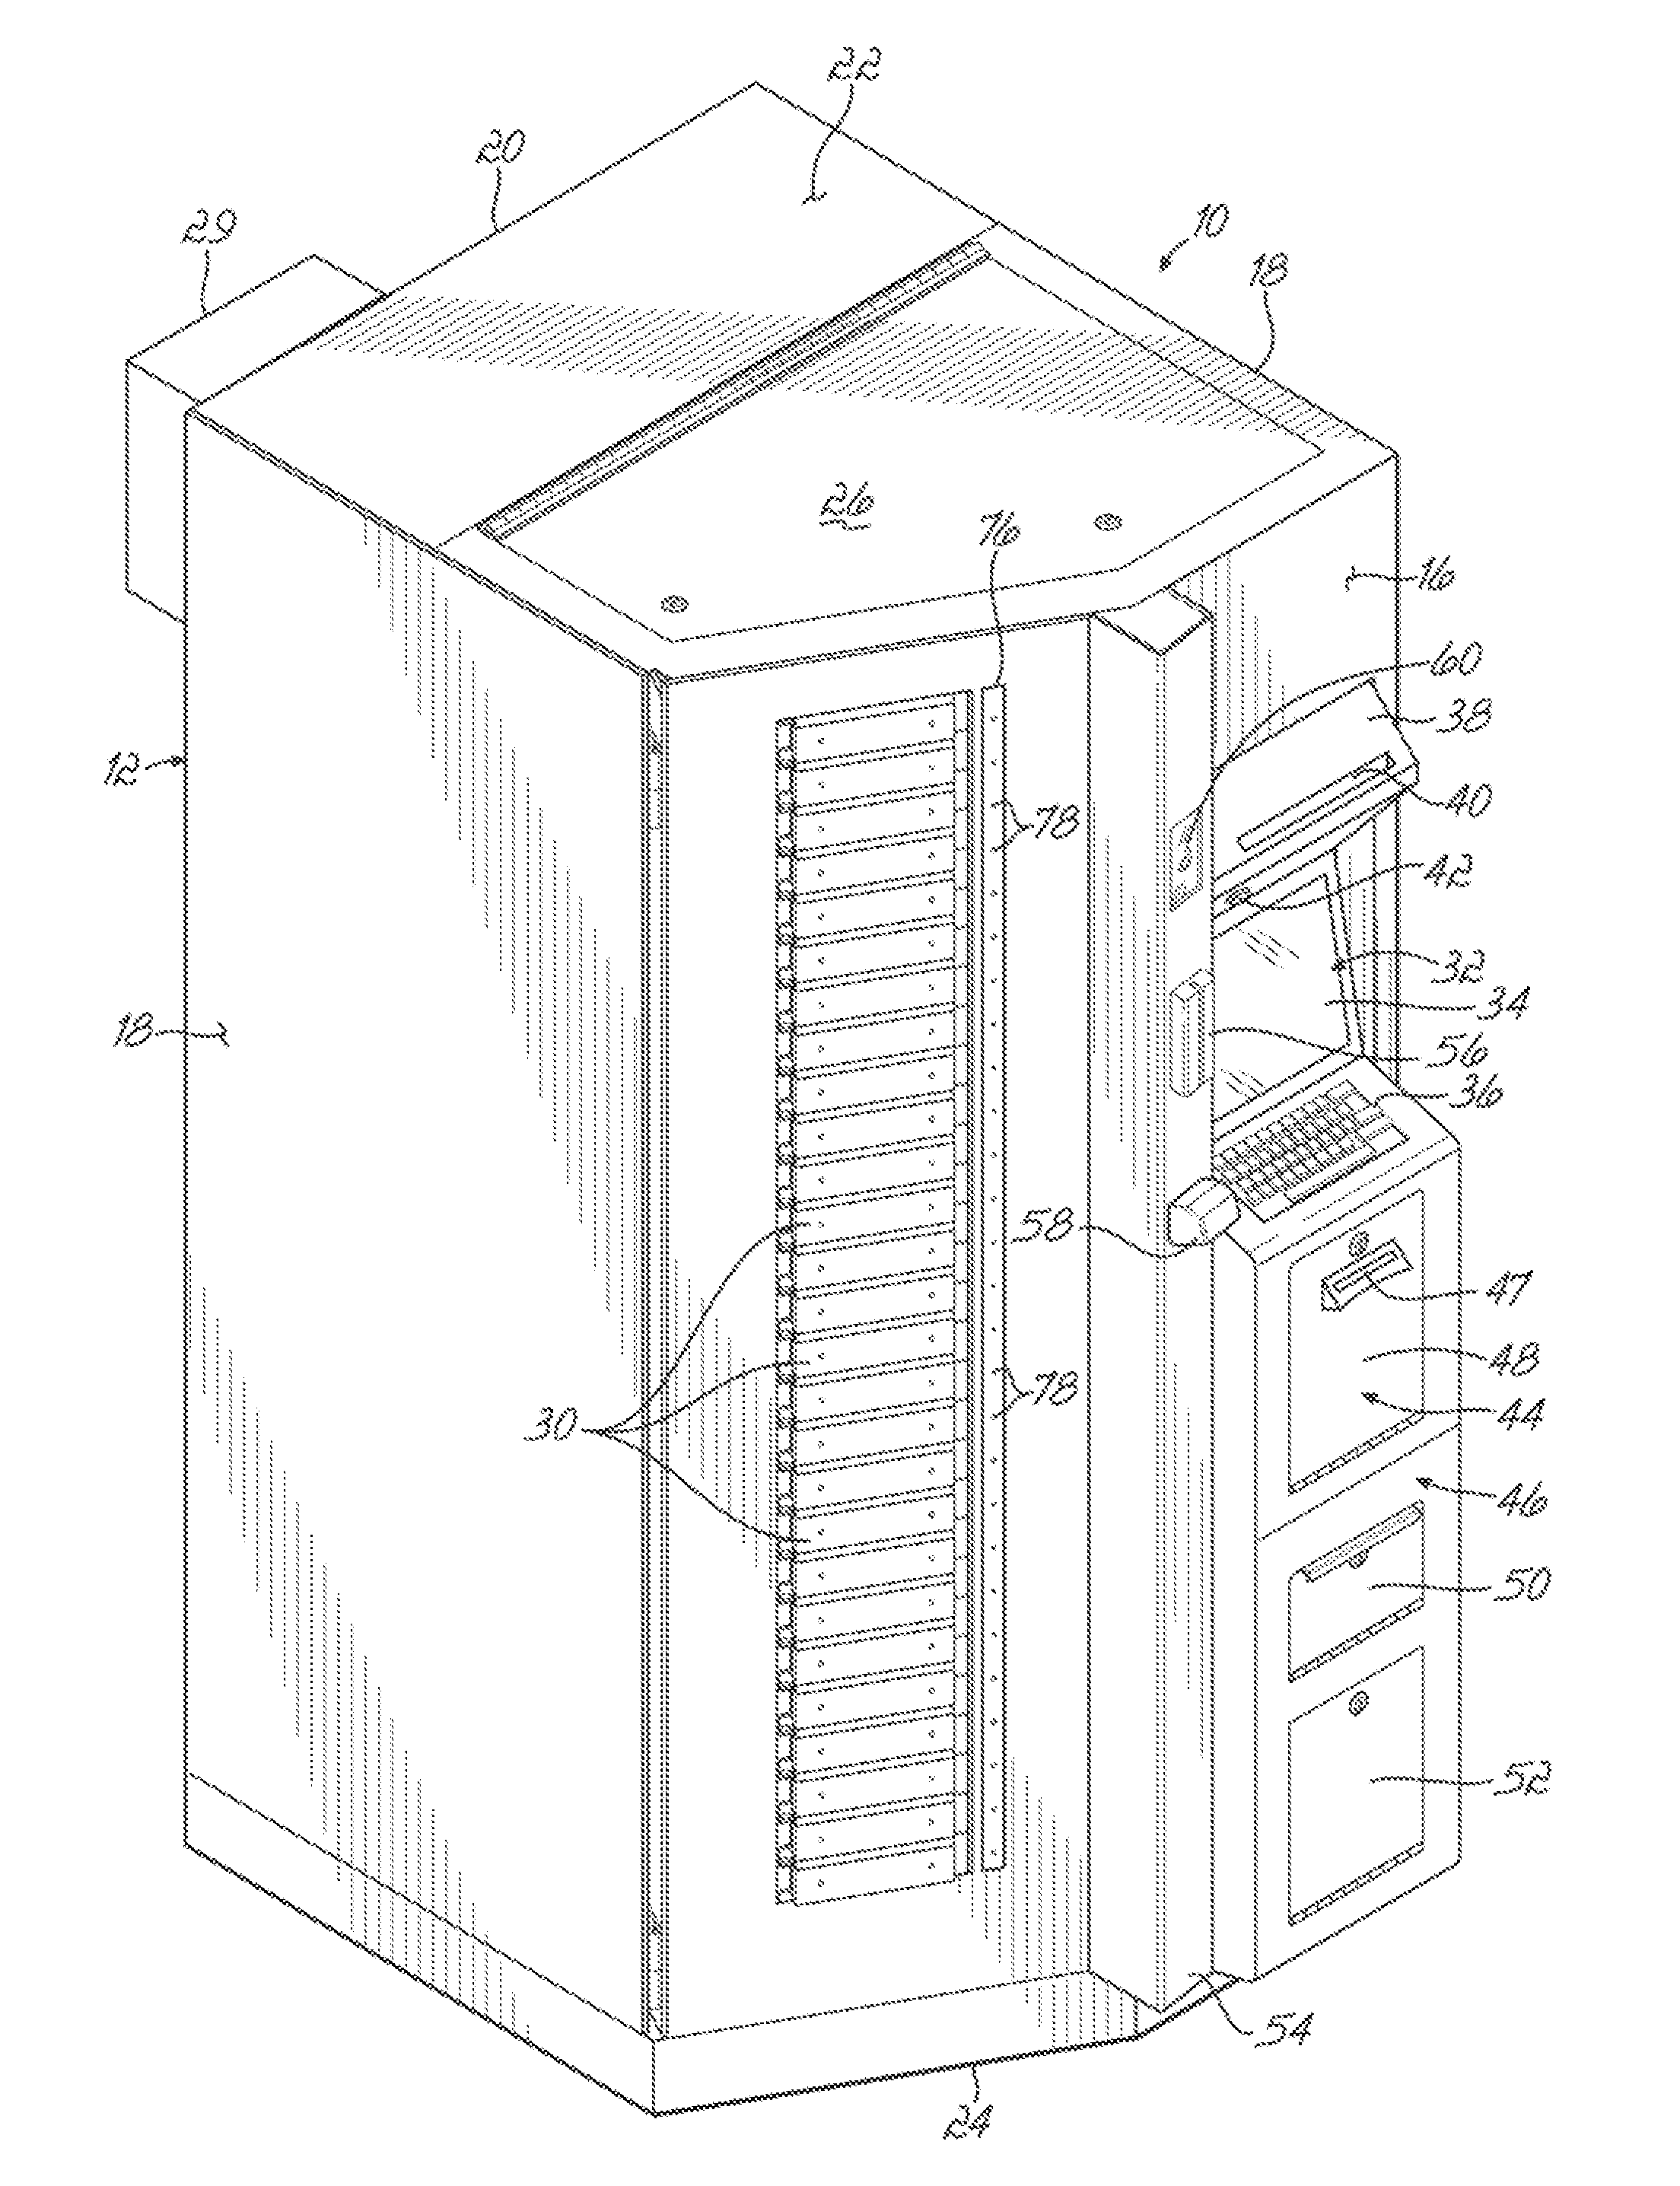 Method and apparatus for onsite distribution of medications and medical supplies